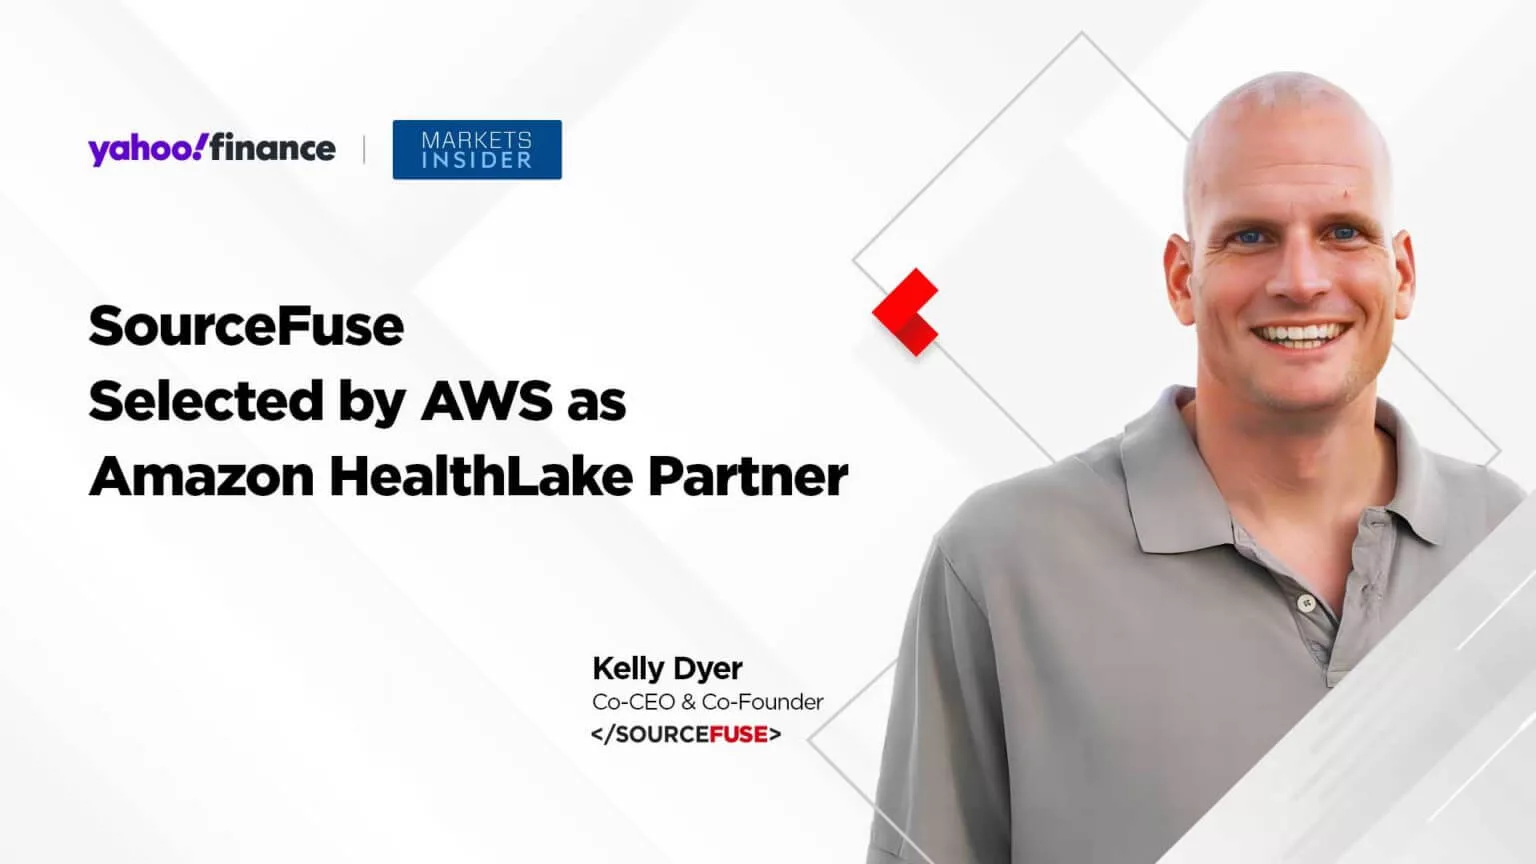 SourceFuse Selected as Amazon HealthLake Partner Further Strengthens its AWS Partnership